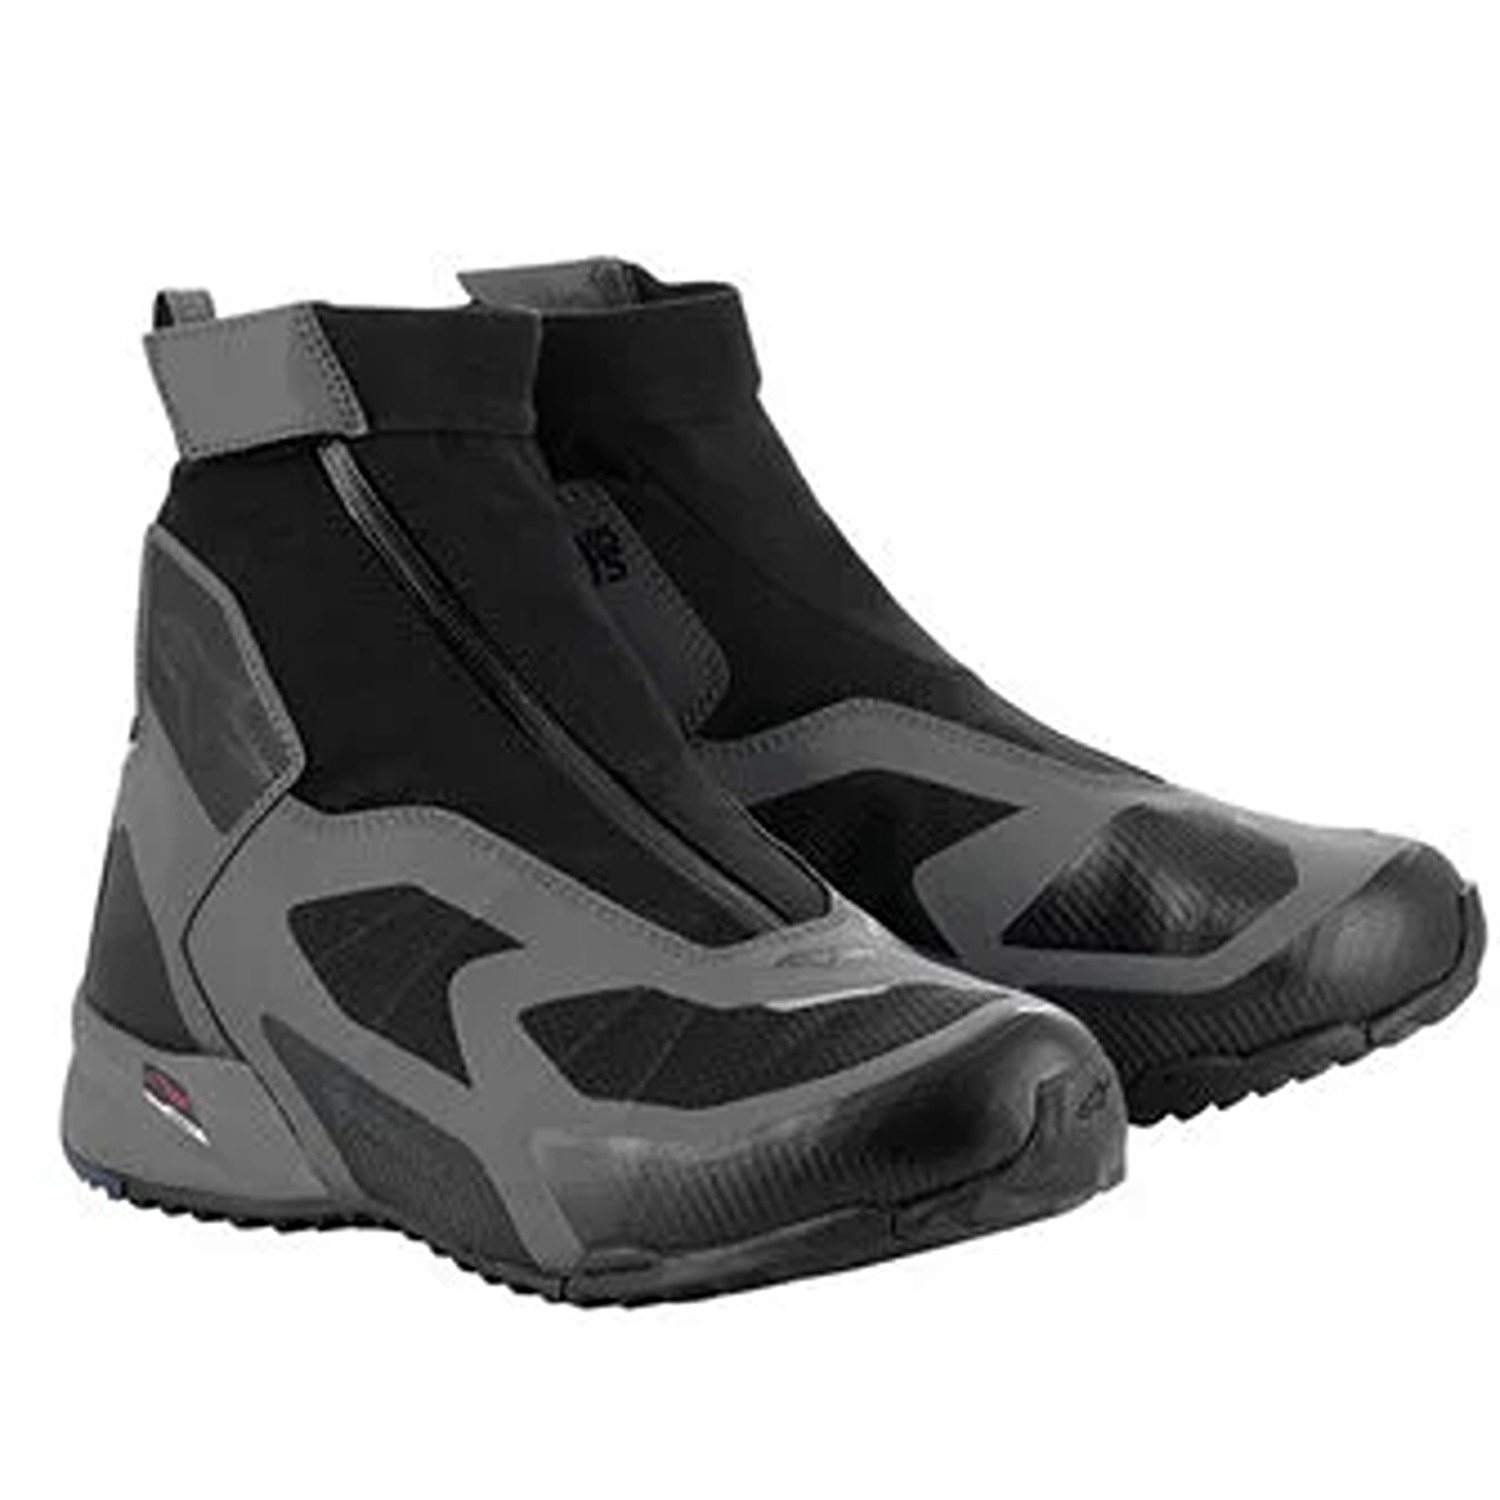 Image of Alpinestars CR-8 Gore-Tex Shoes Black Mid Gray Bright Red Size US 8 EN